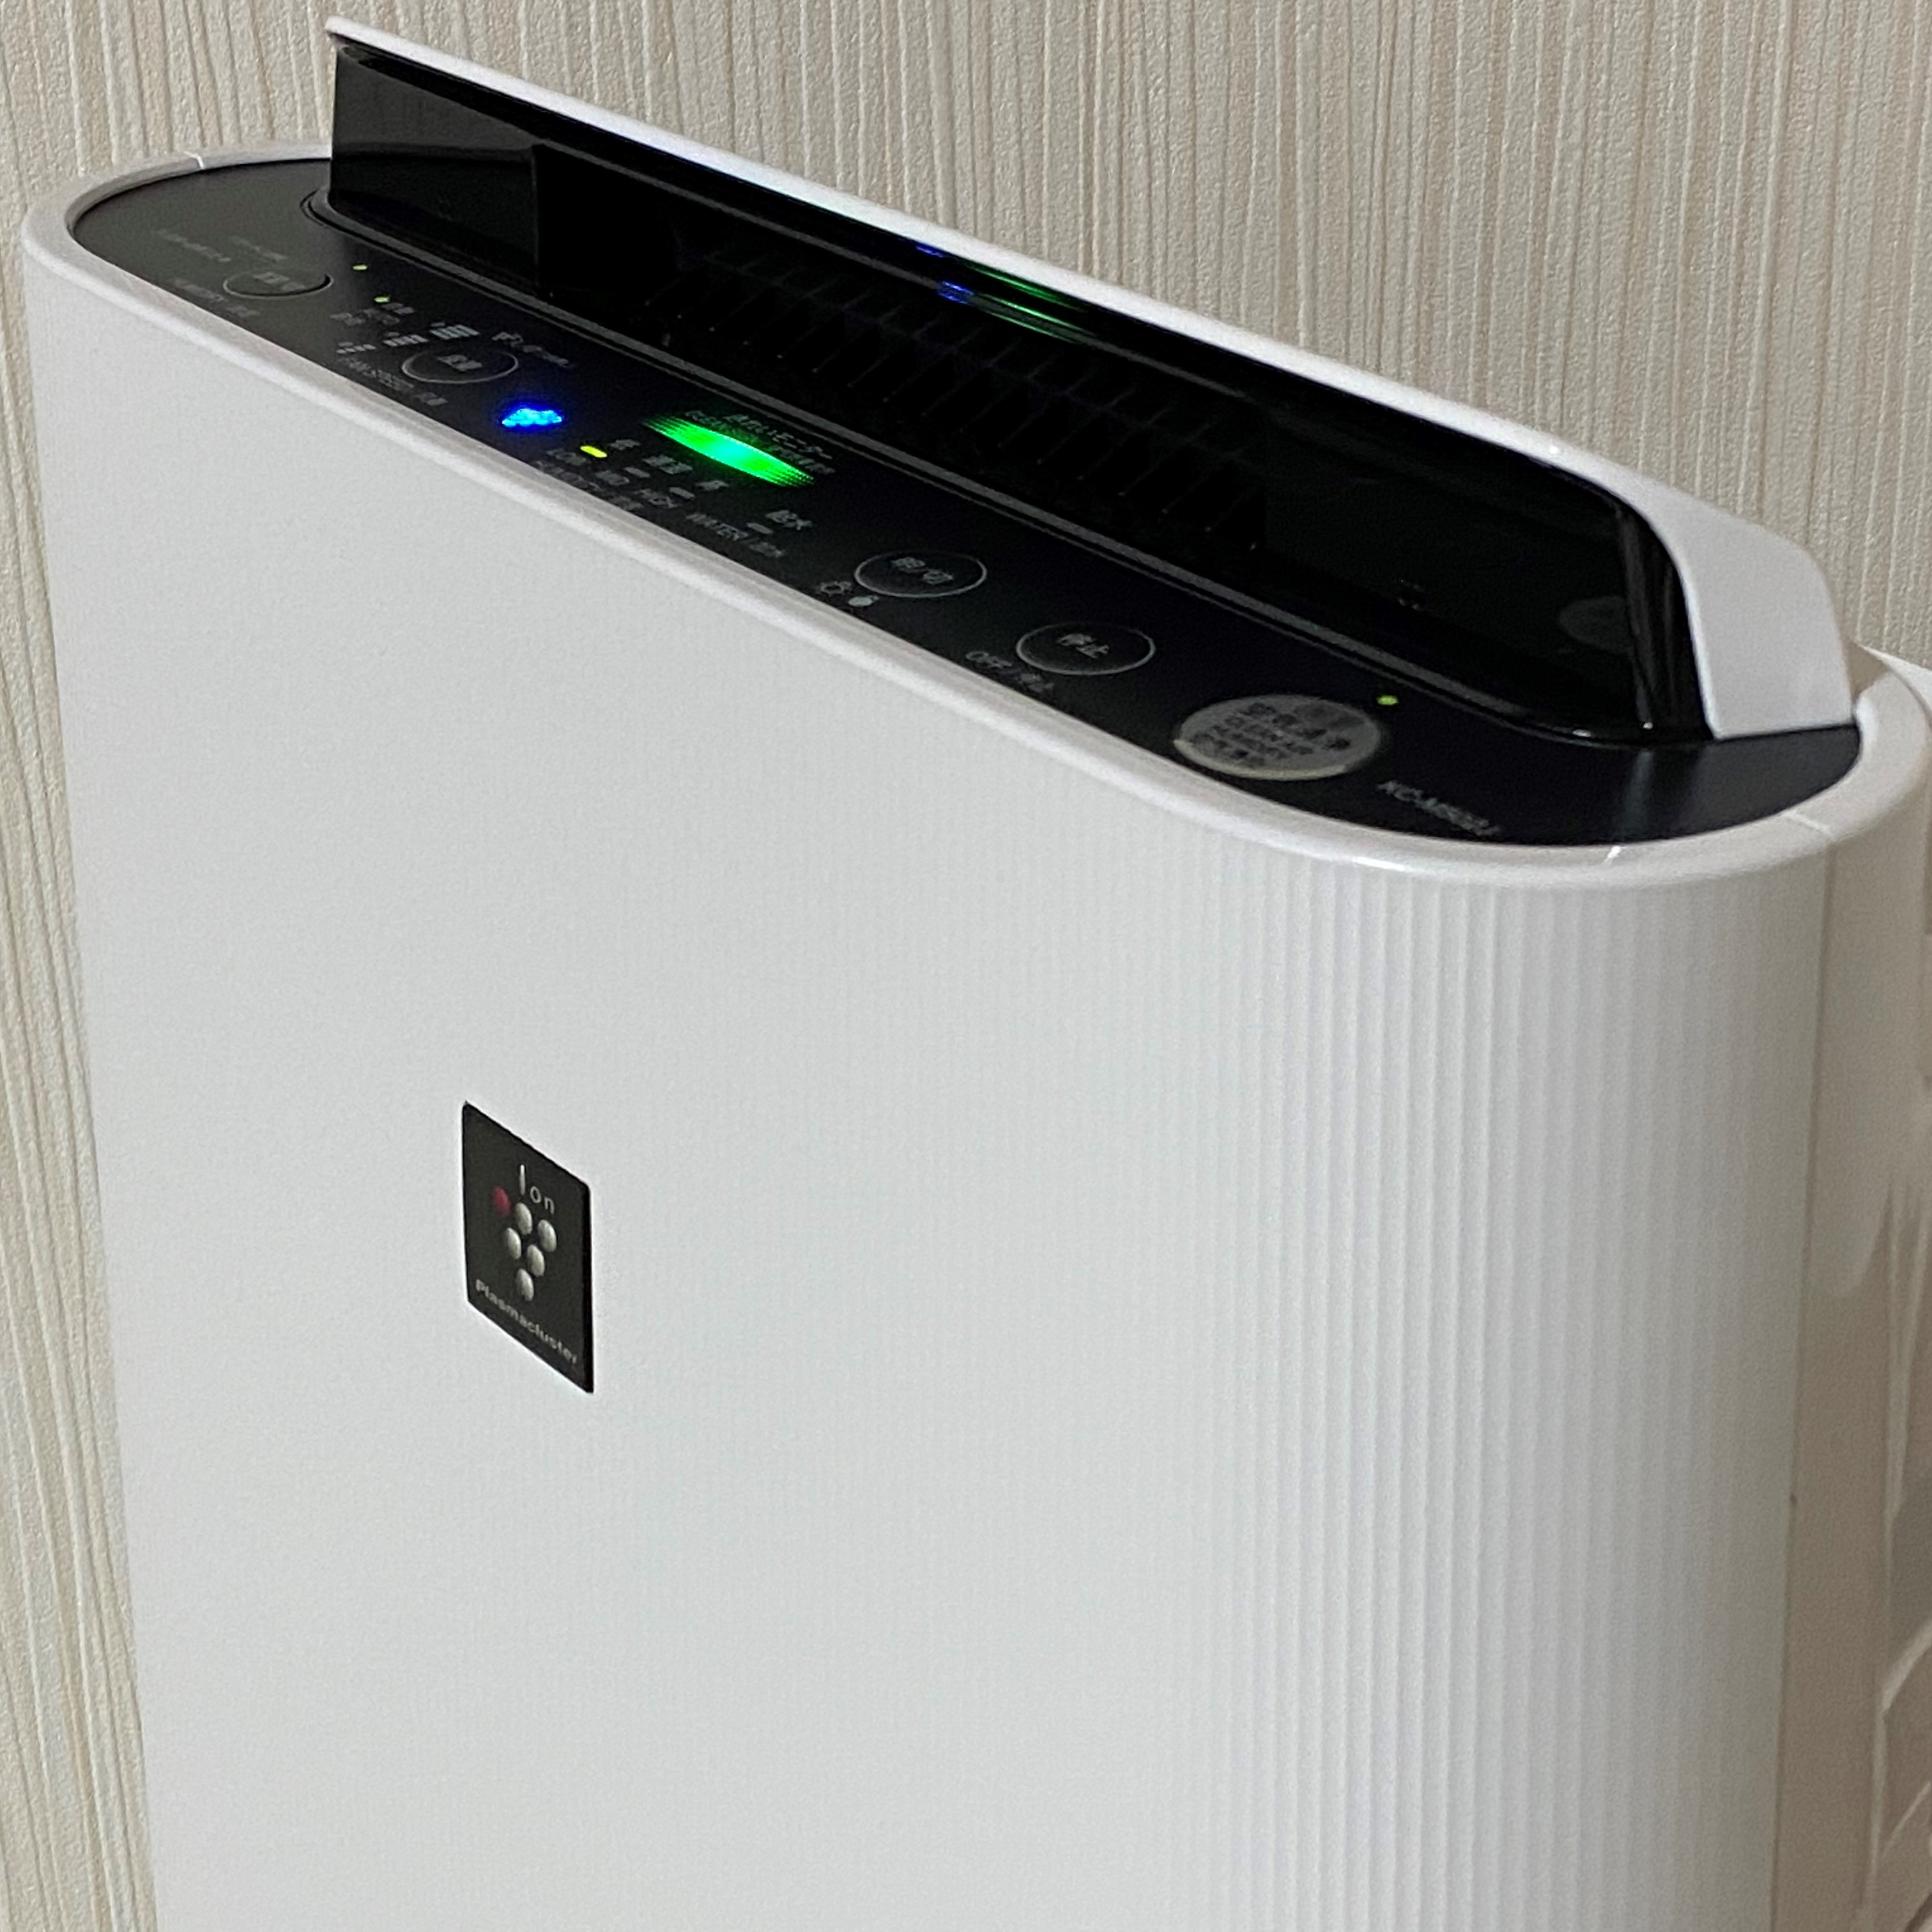 Sharp's popular humidified air purifier "Plasmacluster" is installed in all guest rooms!